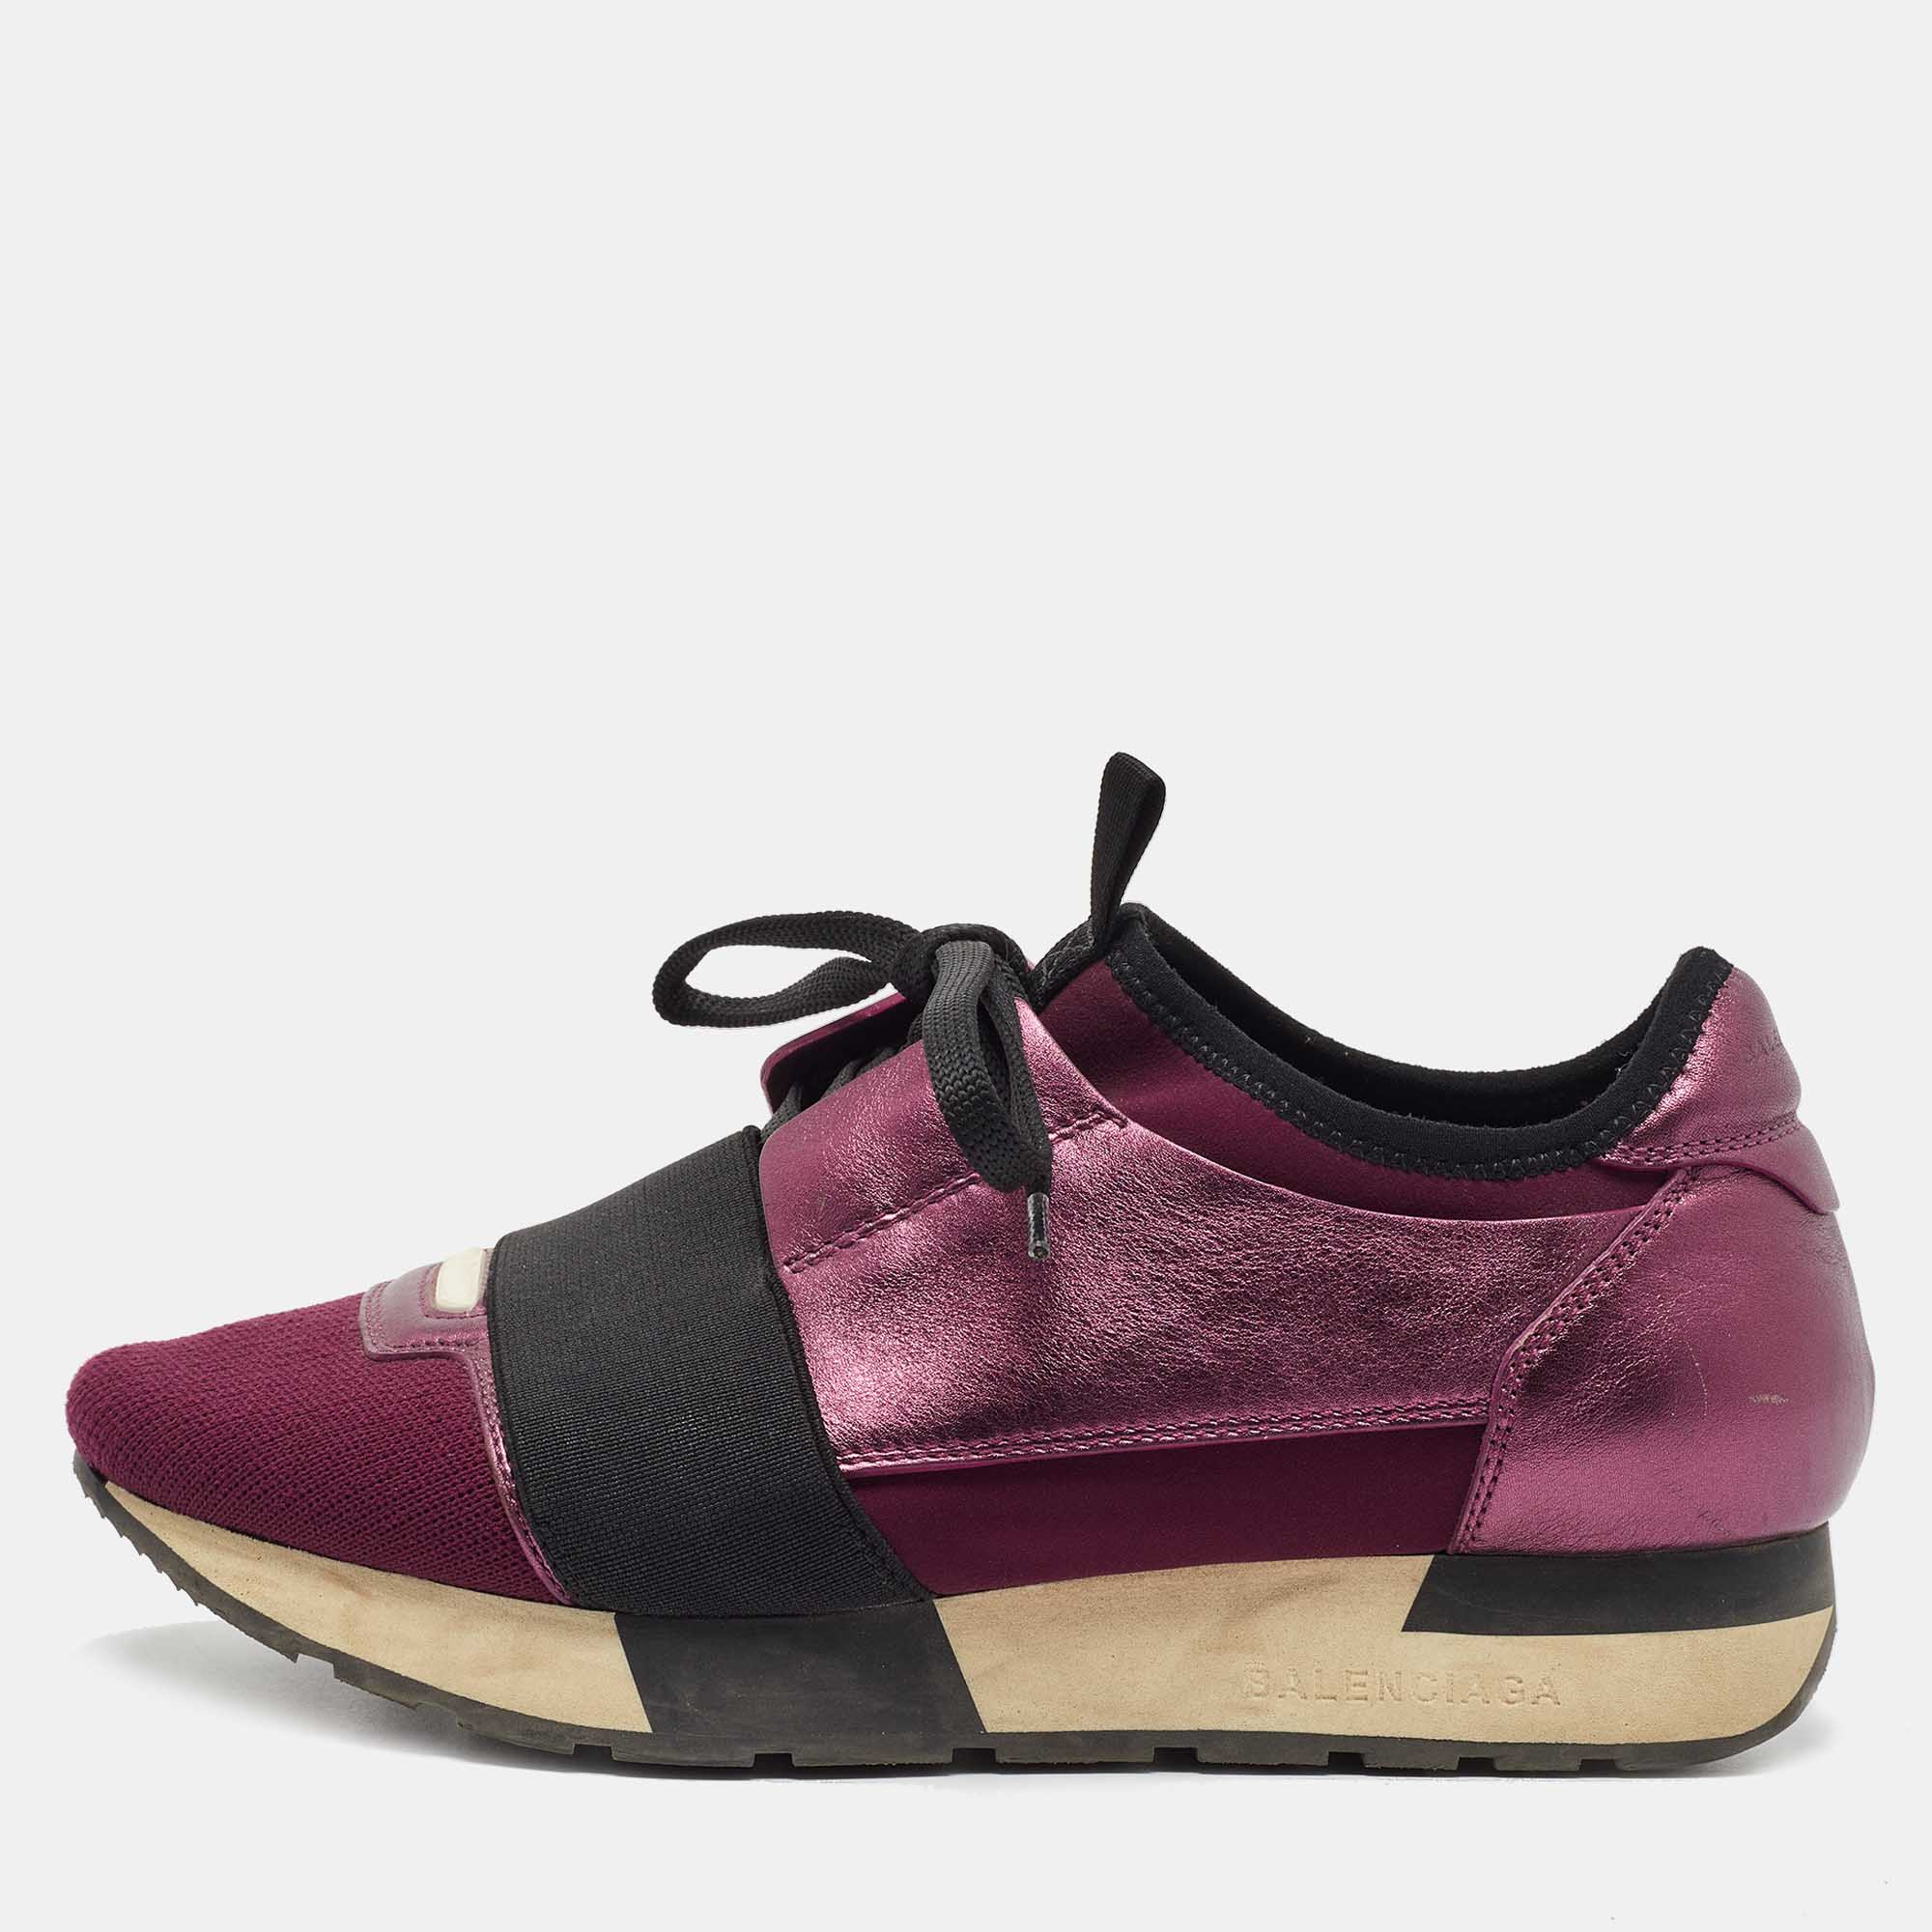 Pre-owned Balenciaga Banciaga Purple/black Leather And Fabric Race Runner Sneakers Size 36